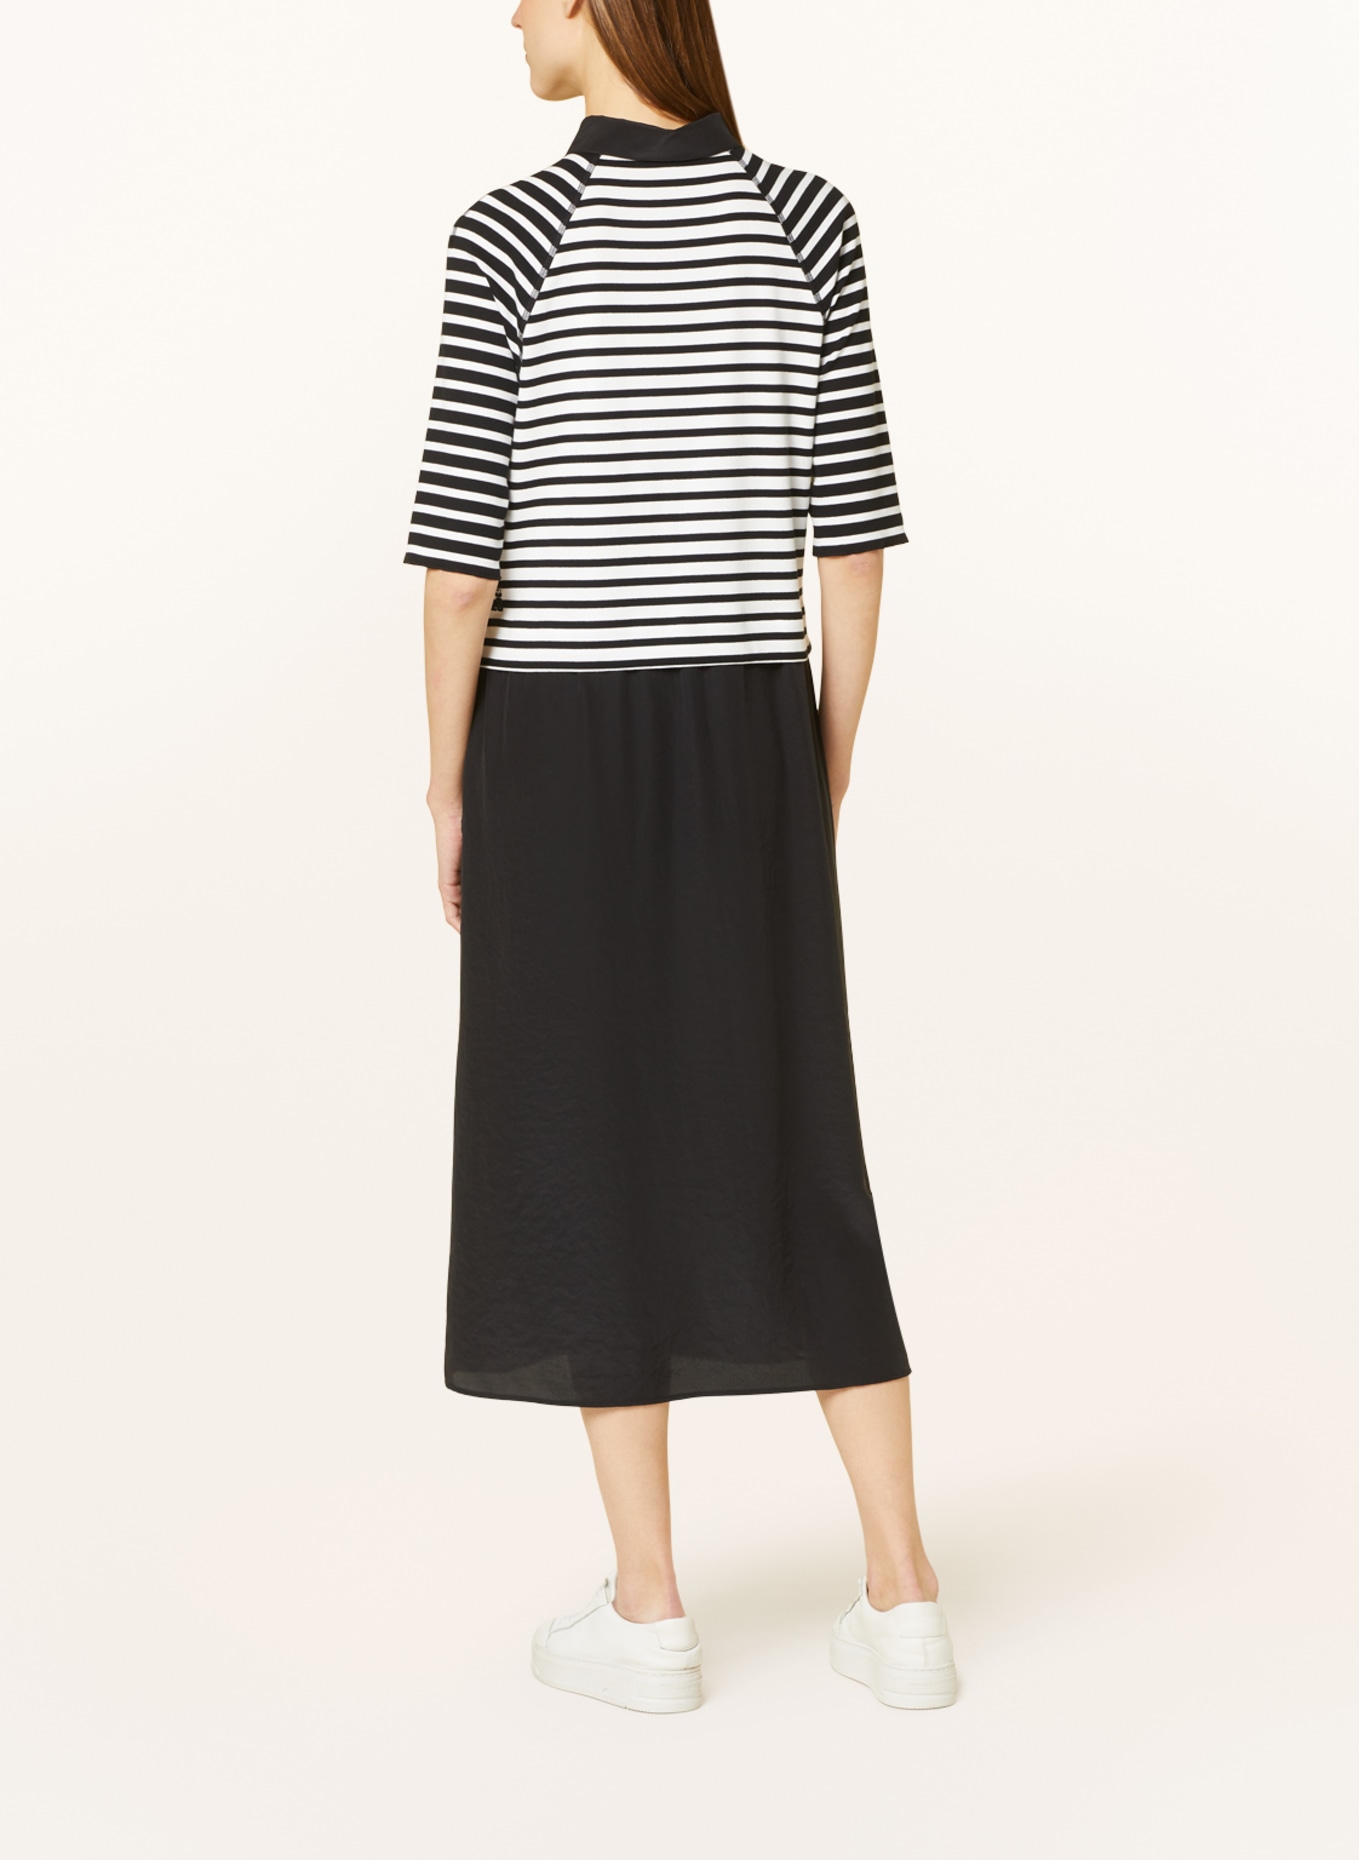 MARC CAIN Jersey polo dress in mixed materials, Color: 910 black and white (Image 3)